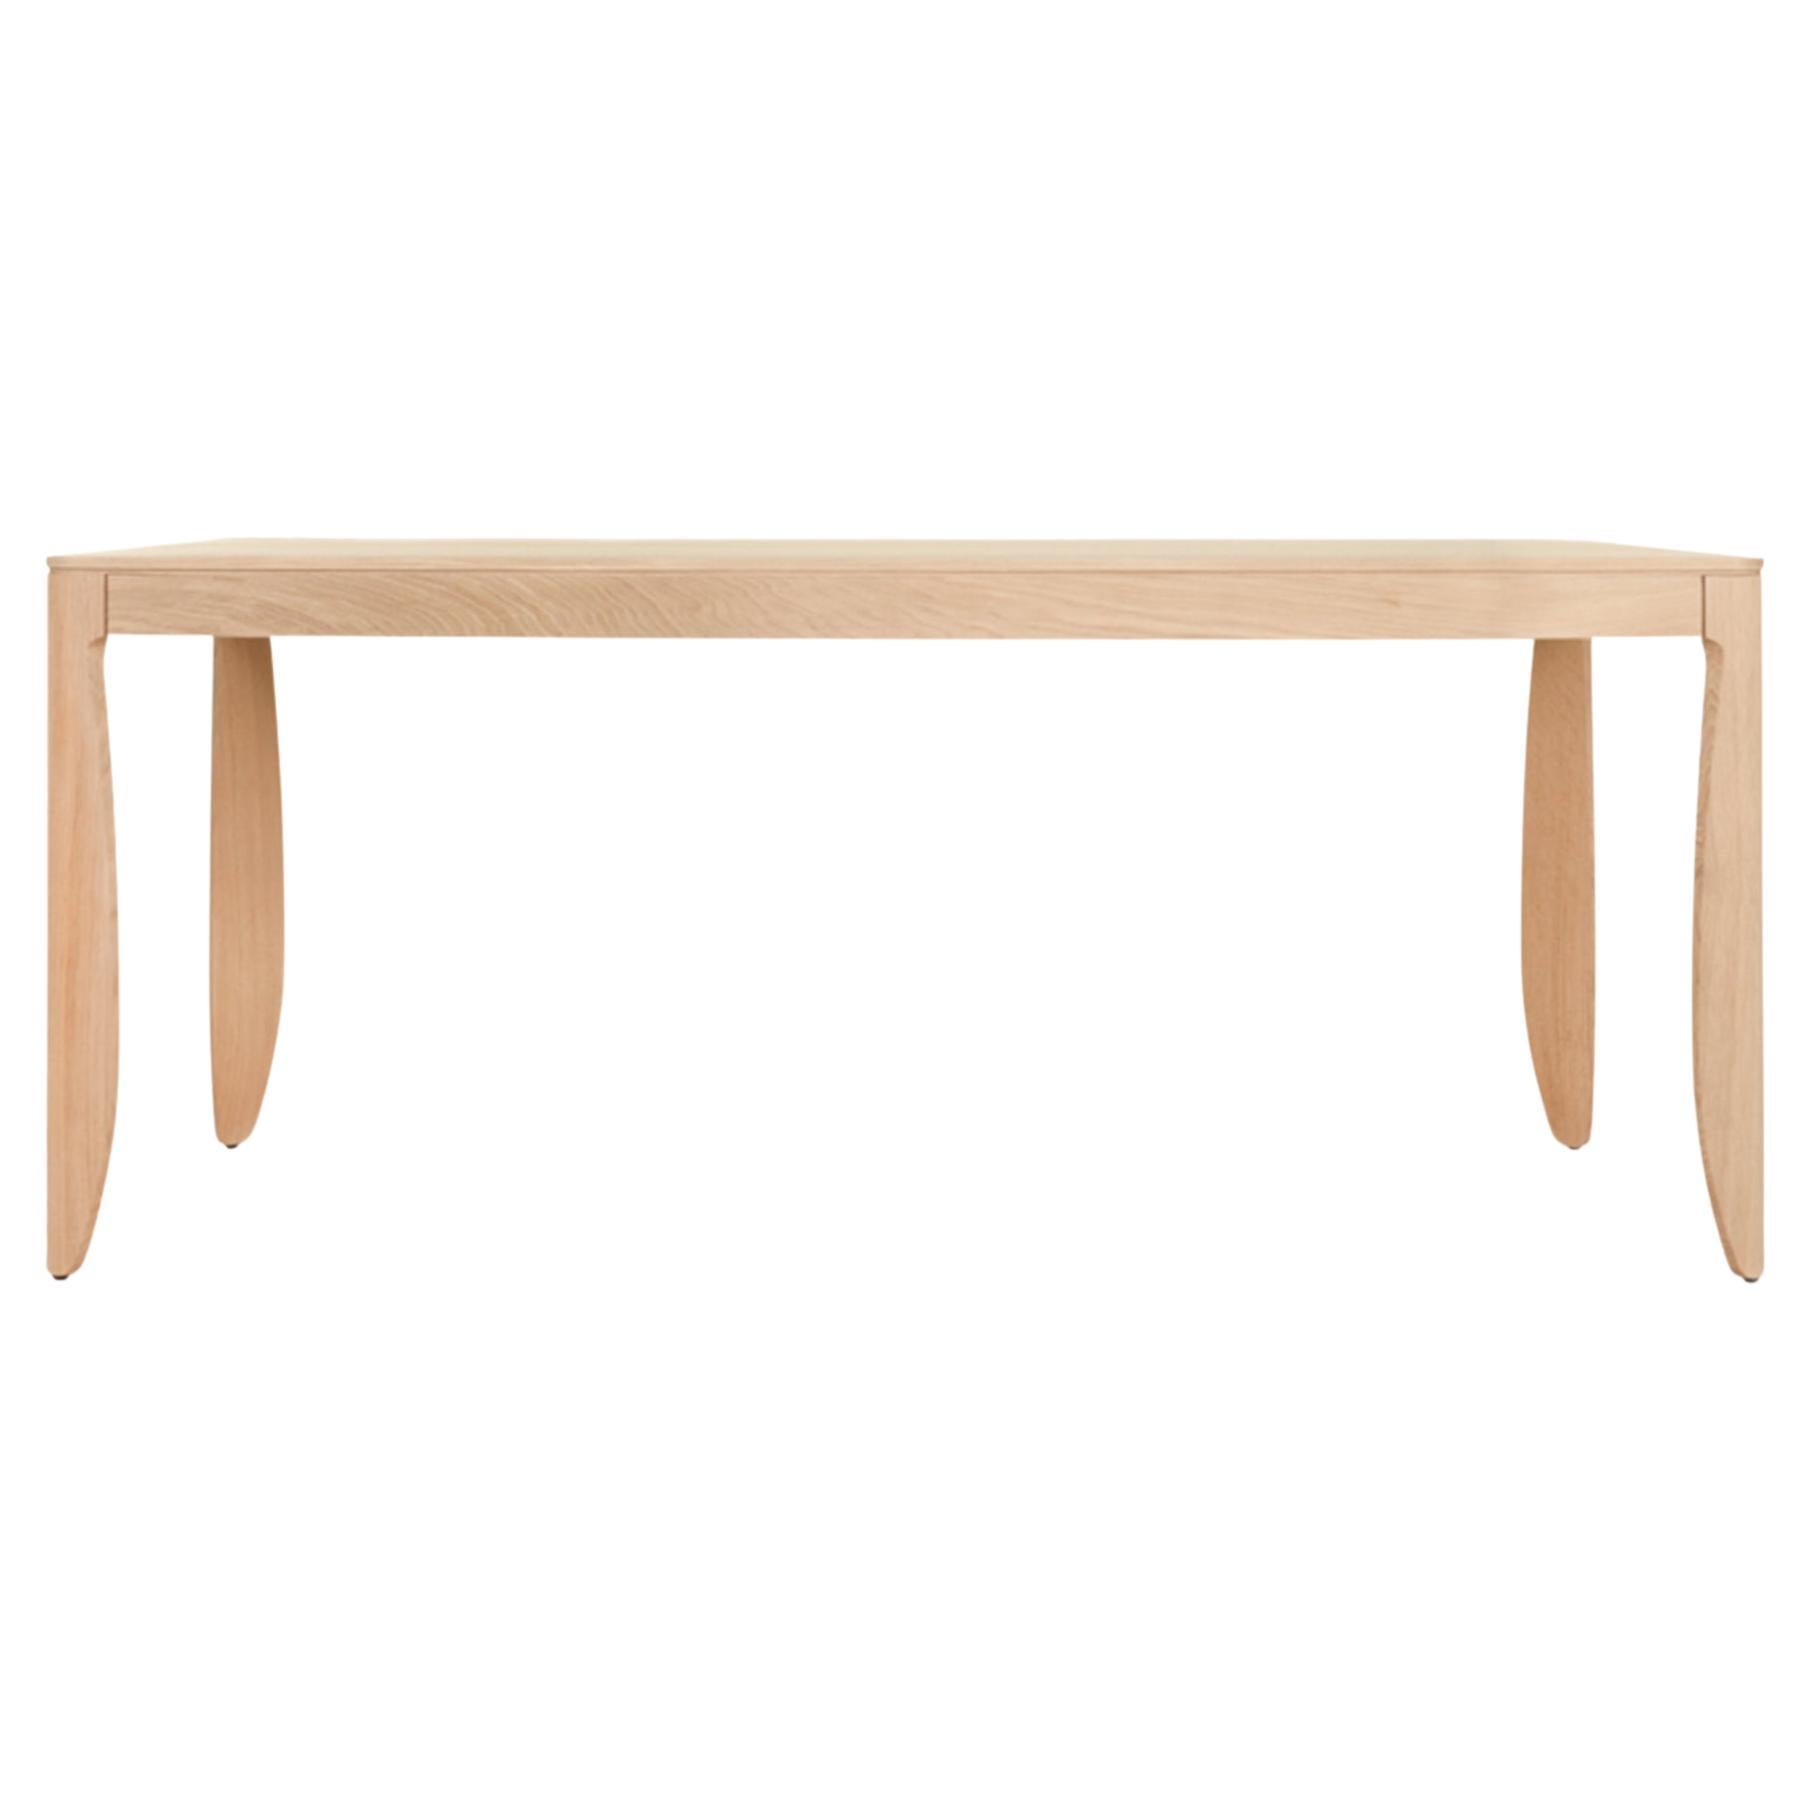 Moooi Monster Small Table White Wash Stained Oak by Marcel Wanders Studio For Sale